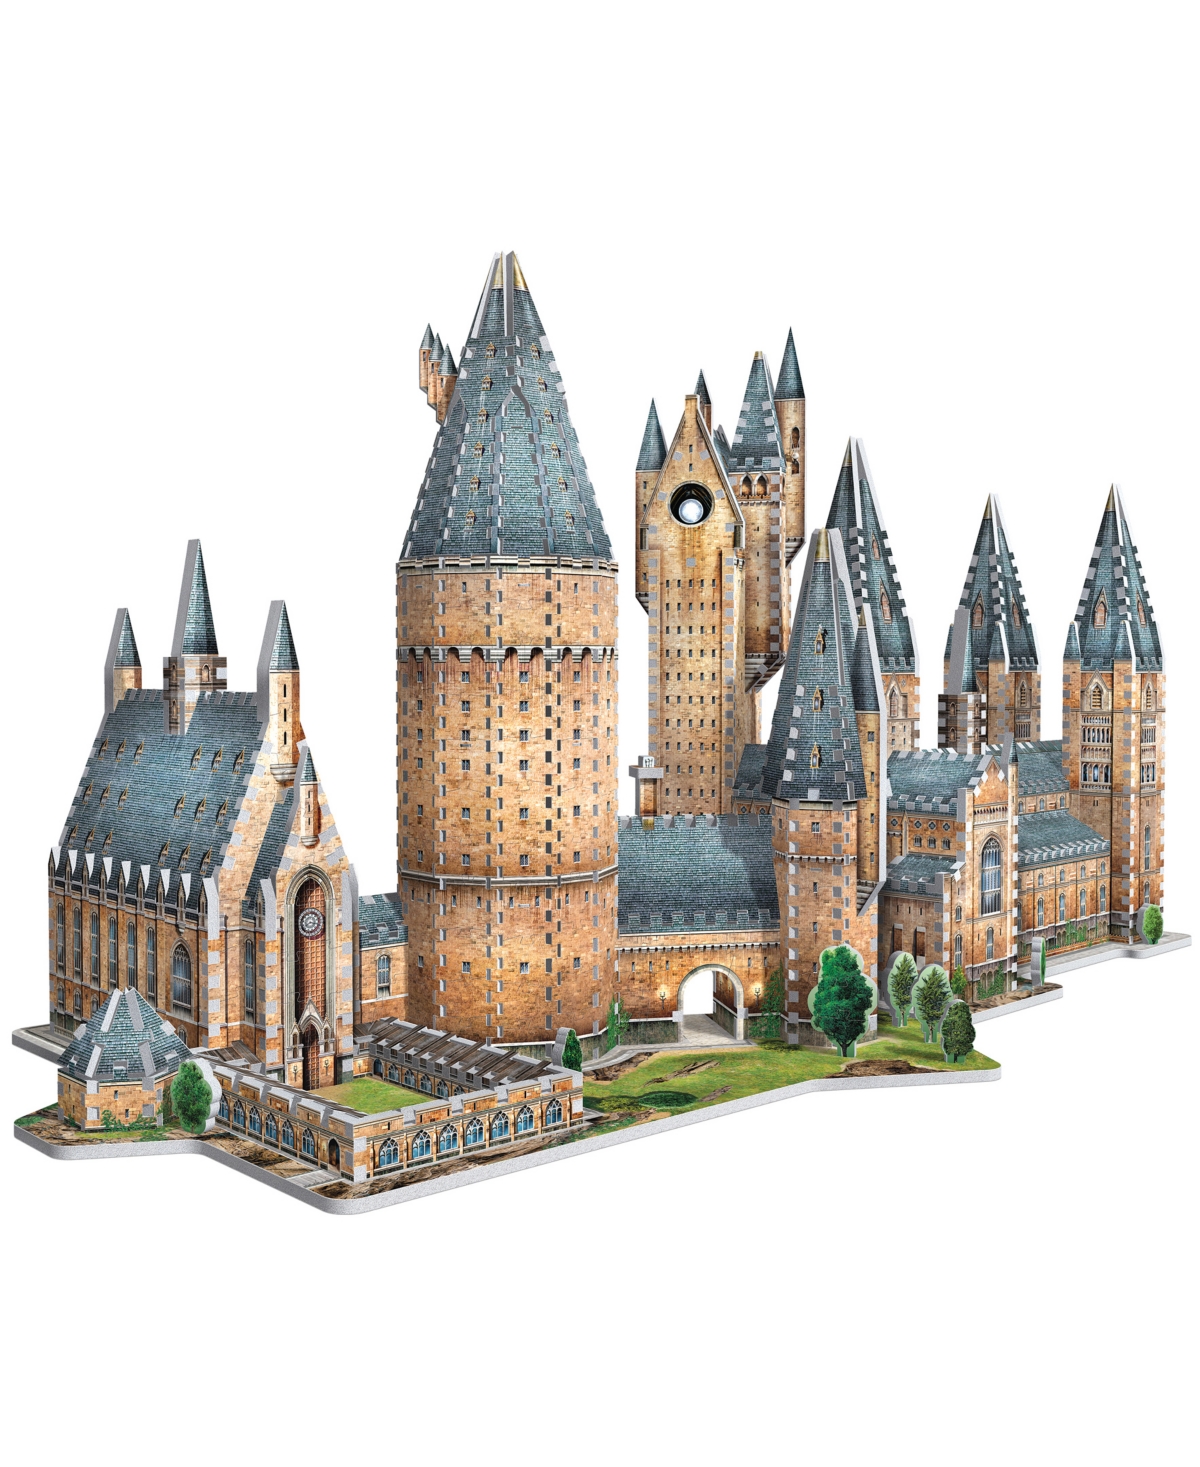 University Games Wrebbit Harry Potter Collection Hogwarts Castle 2 3d Puzzles Great Hall And Astronomy Tower, 1725 Pi In No Color